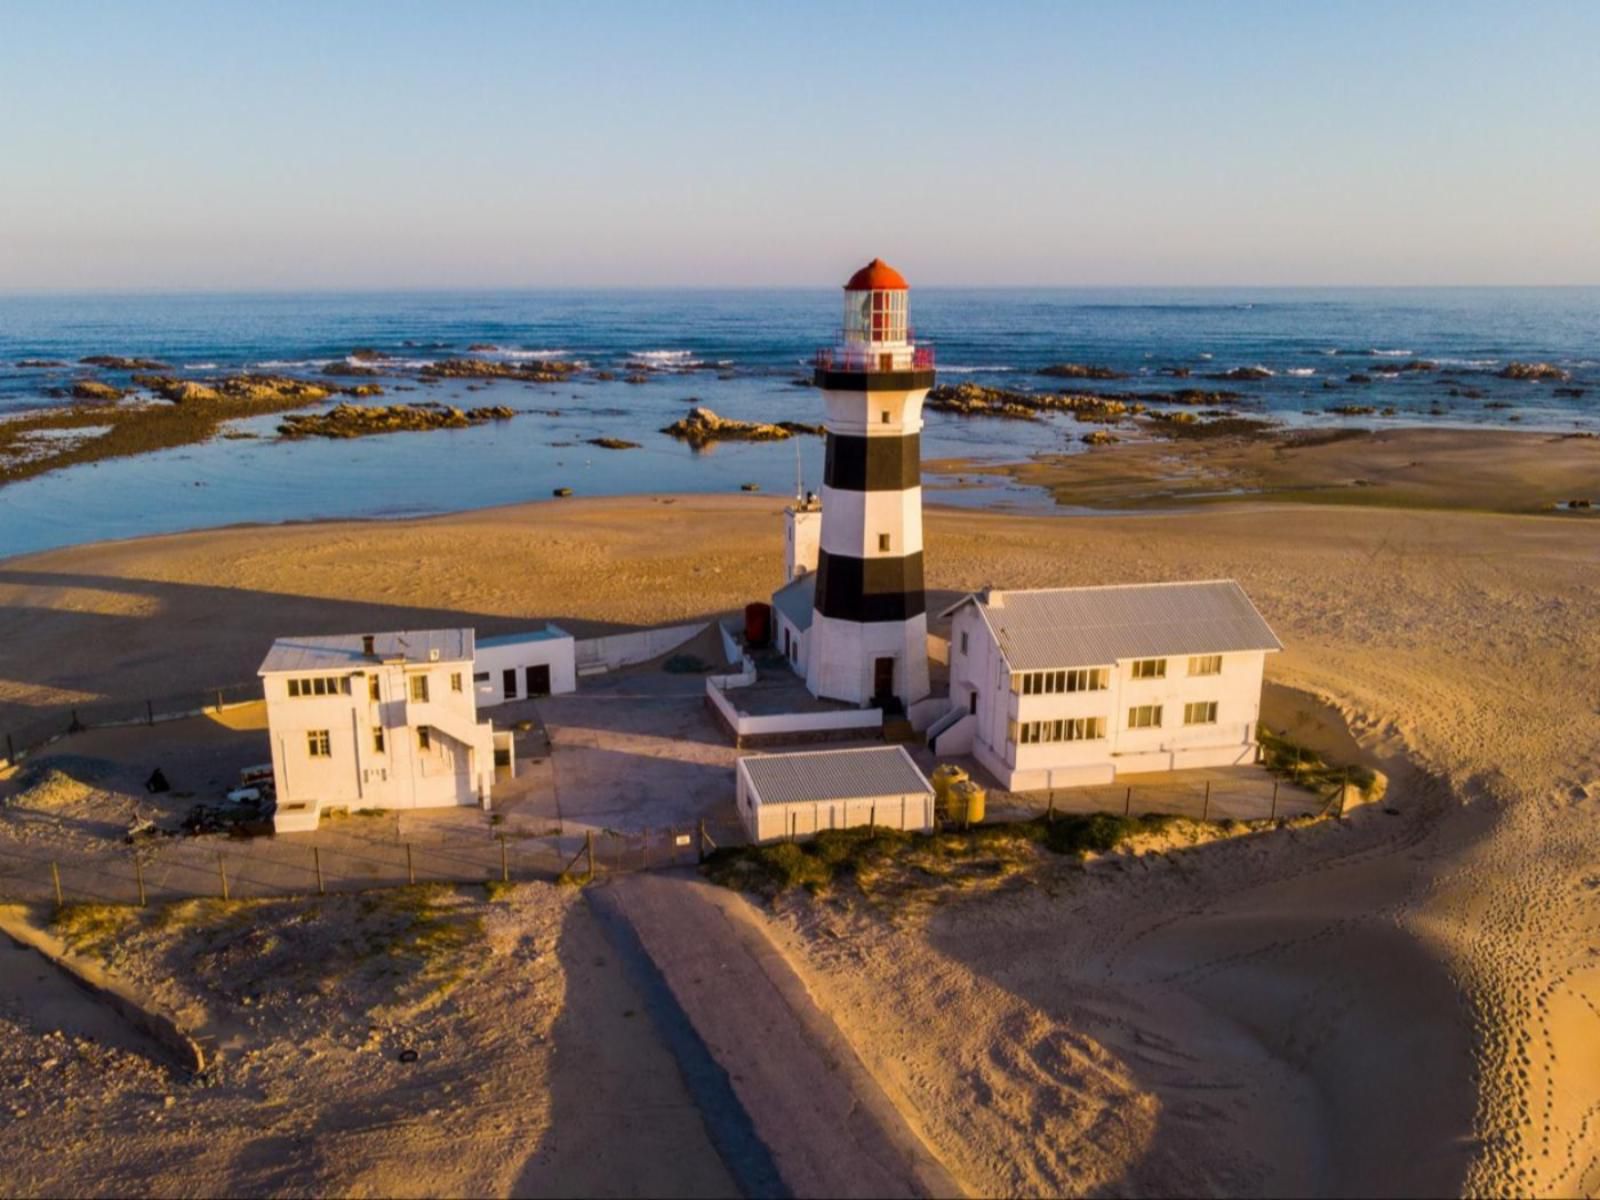 Algoa Bay Bed And Breakfast Humewood Port Elizabeth Eastern Cape South Africa Beach, Nature, Sand, Building, Architecture, Lighthouse, Tower